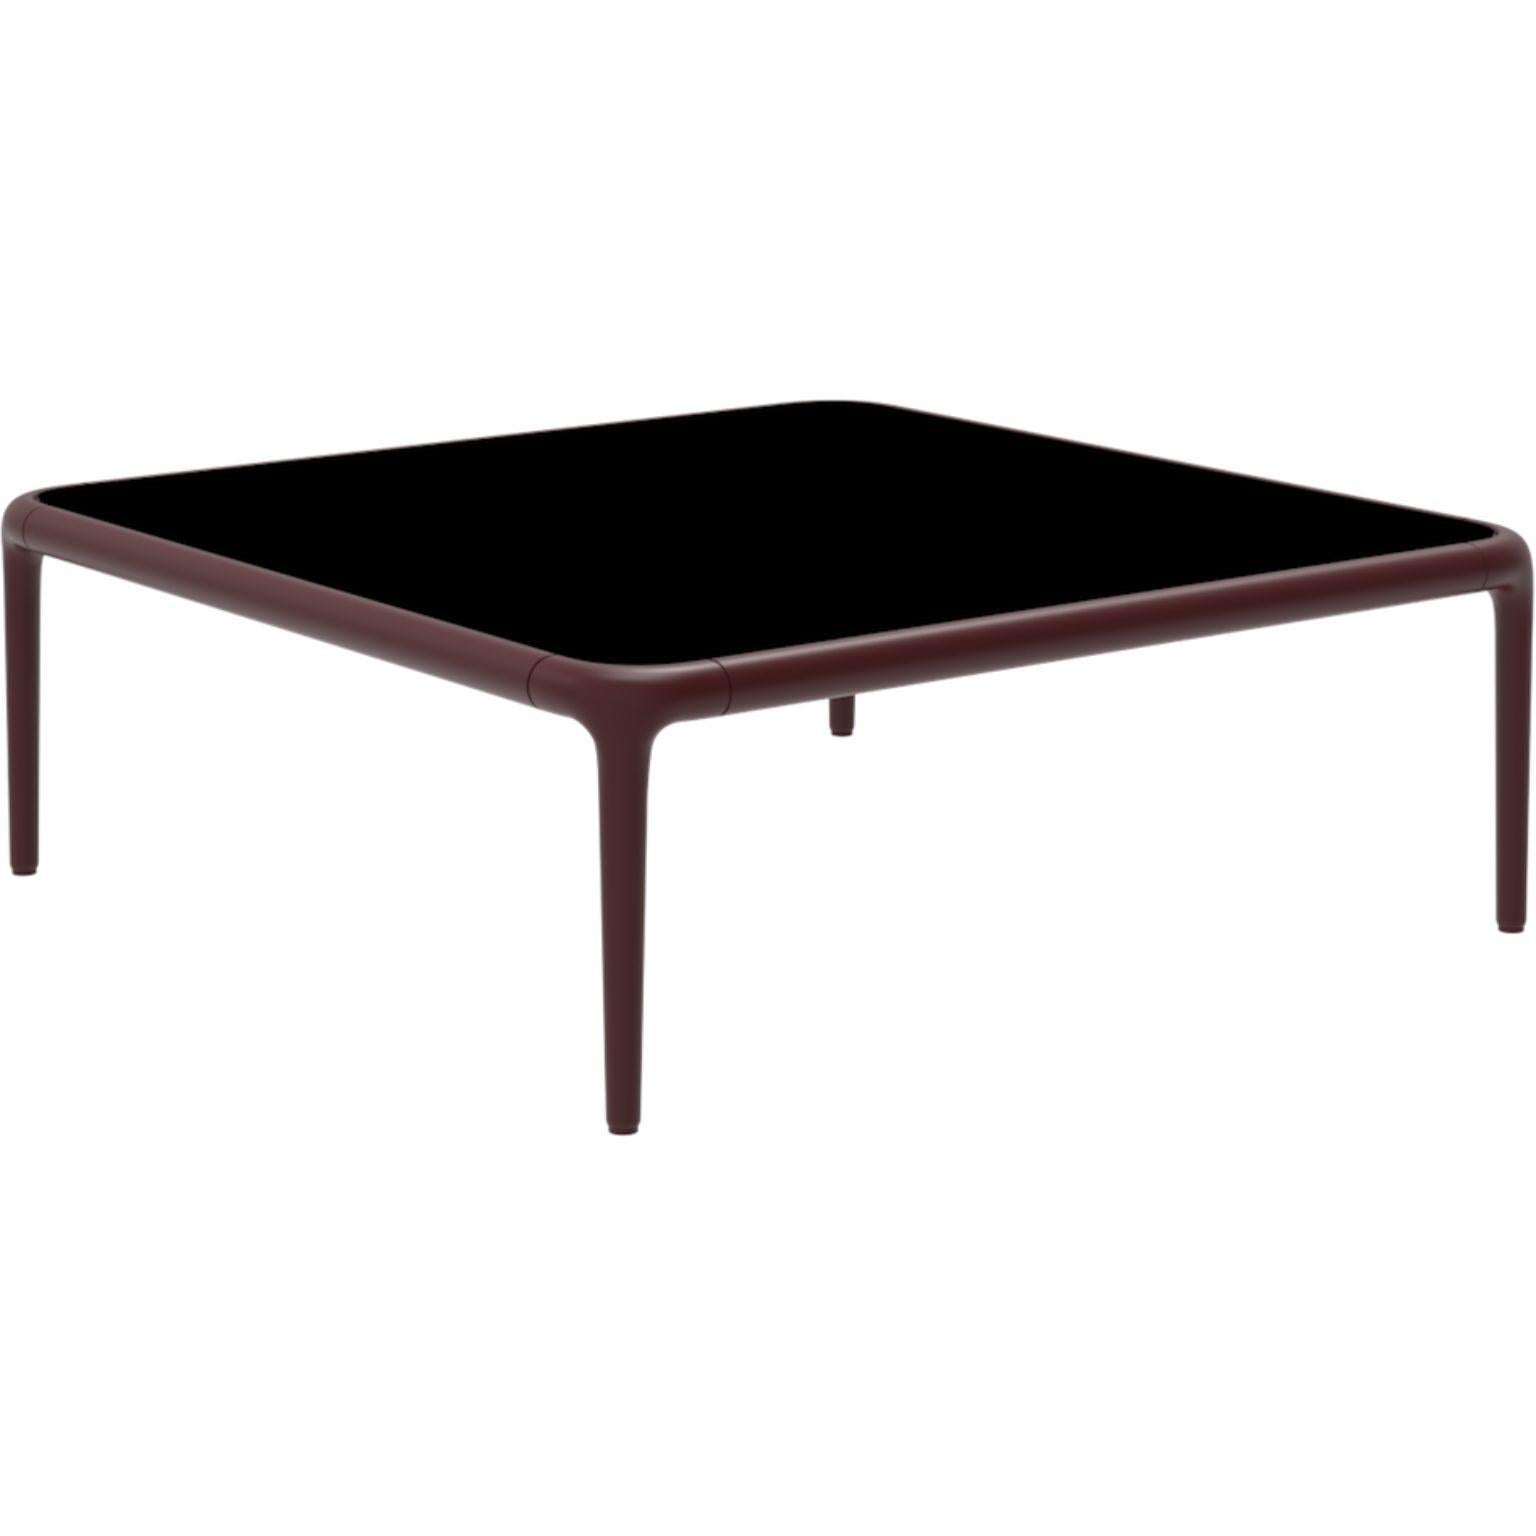 Xaloc burgundy coffee table 80 with glass top by Mowee.
Dimensions: D80 x W80 x H28 cm.
Materials: Aluminum, tinted tempered glass top.
Also available in different aluminum colors and finishes (HPL Black Edge or Neolith). 

Xaloc synthesizes